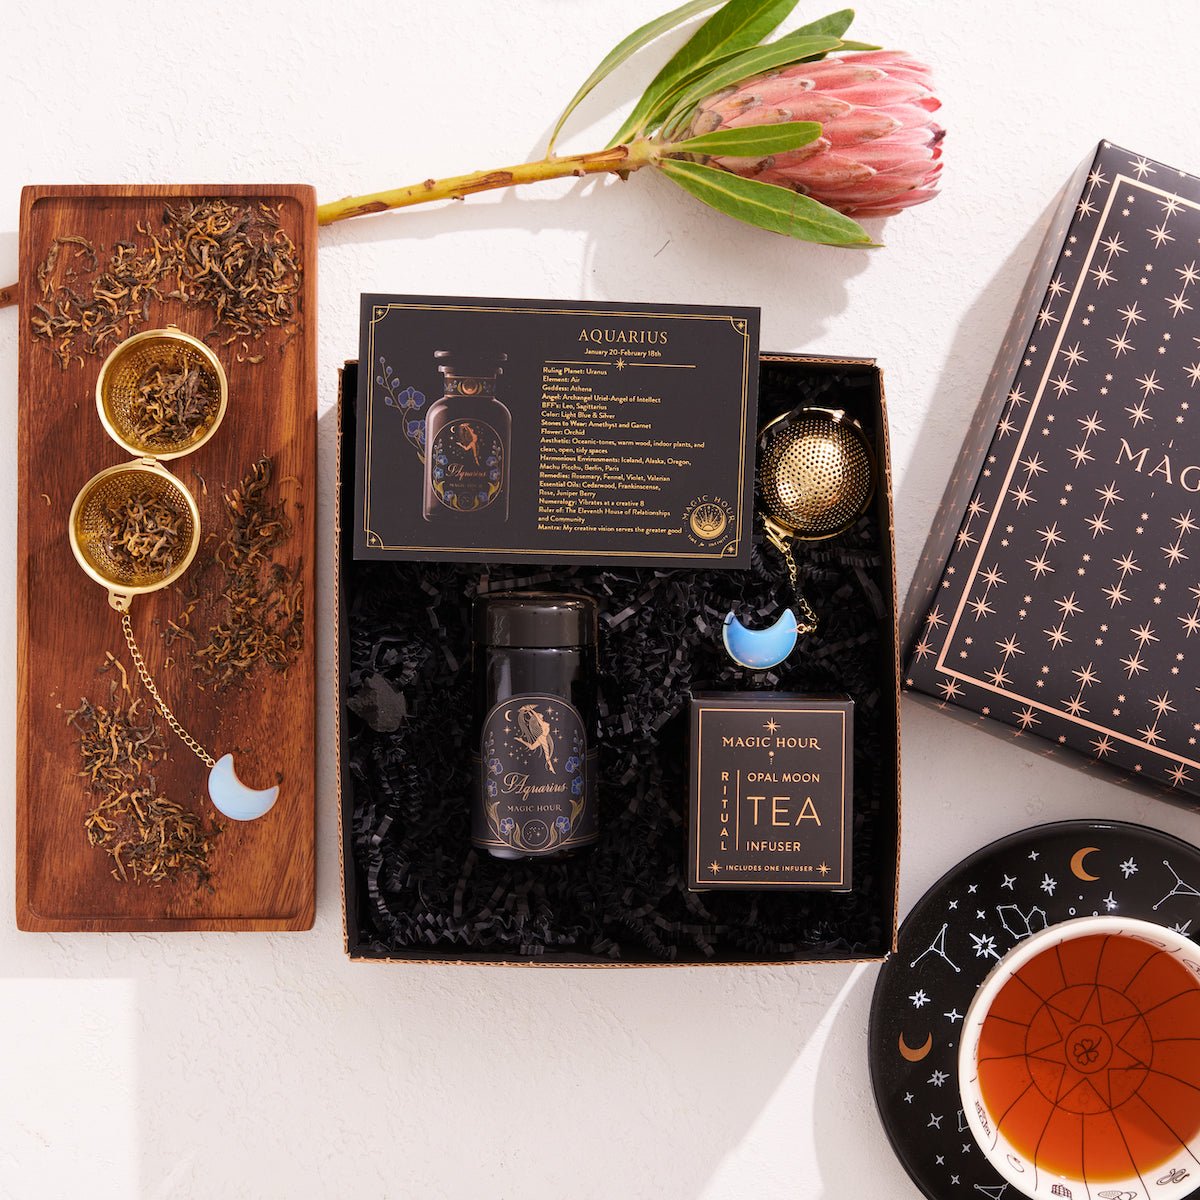 Astrology-Minded Mini Gift Set with Opal Moon Strainer-Aquarius: Luxe Sampler with Opal Moon Tea Strainer-Magic Hour